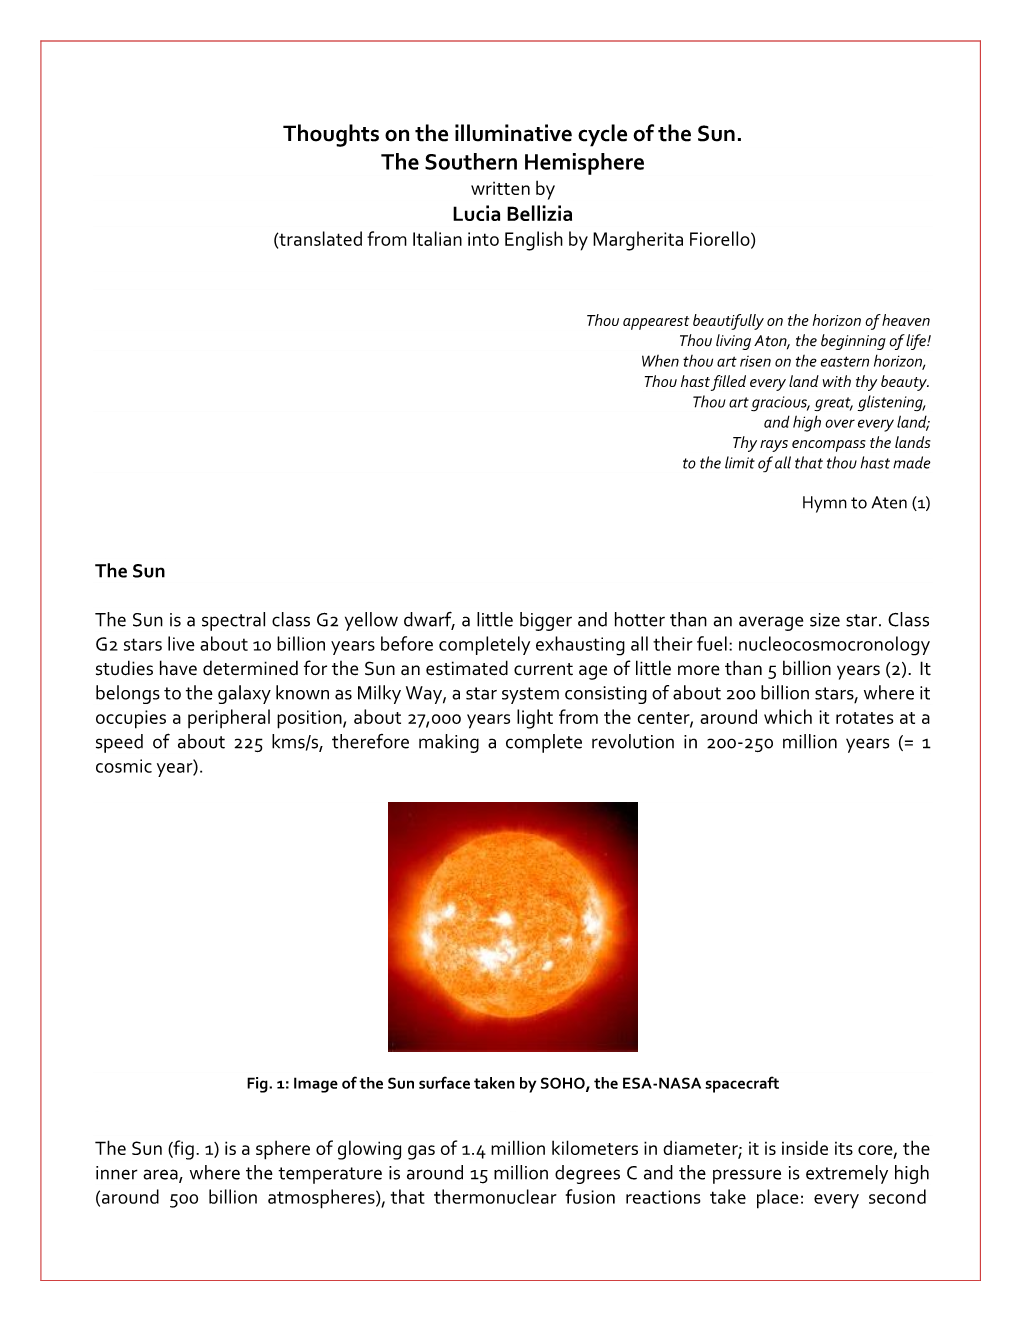 Thoughts on the Illuminative Cycle of the Sun